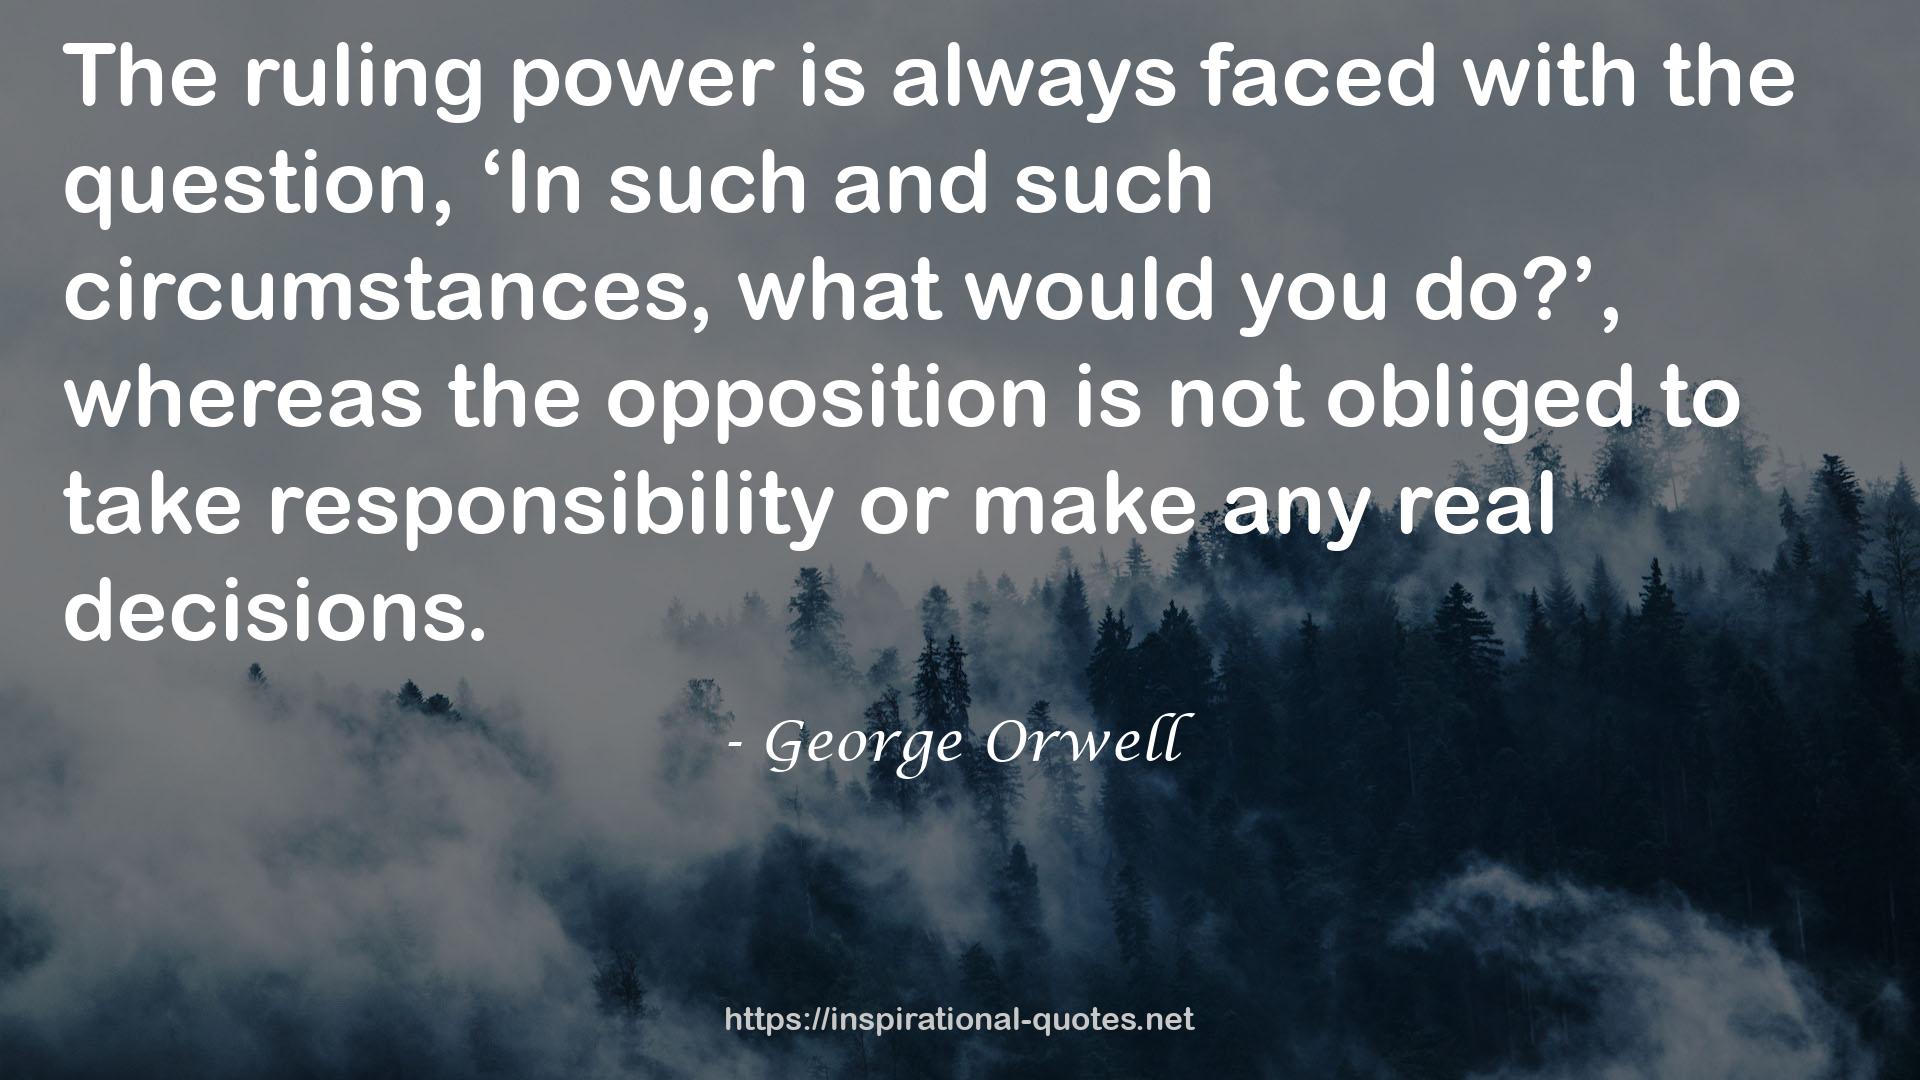 George Orwell QUOTES